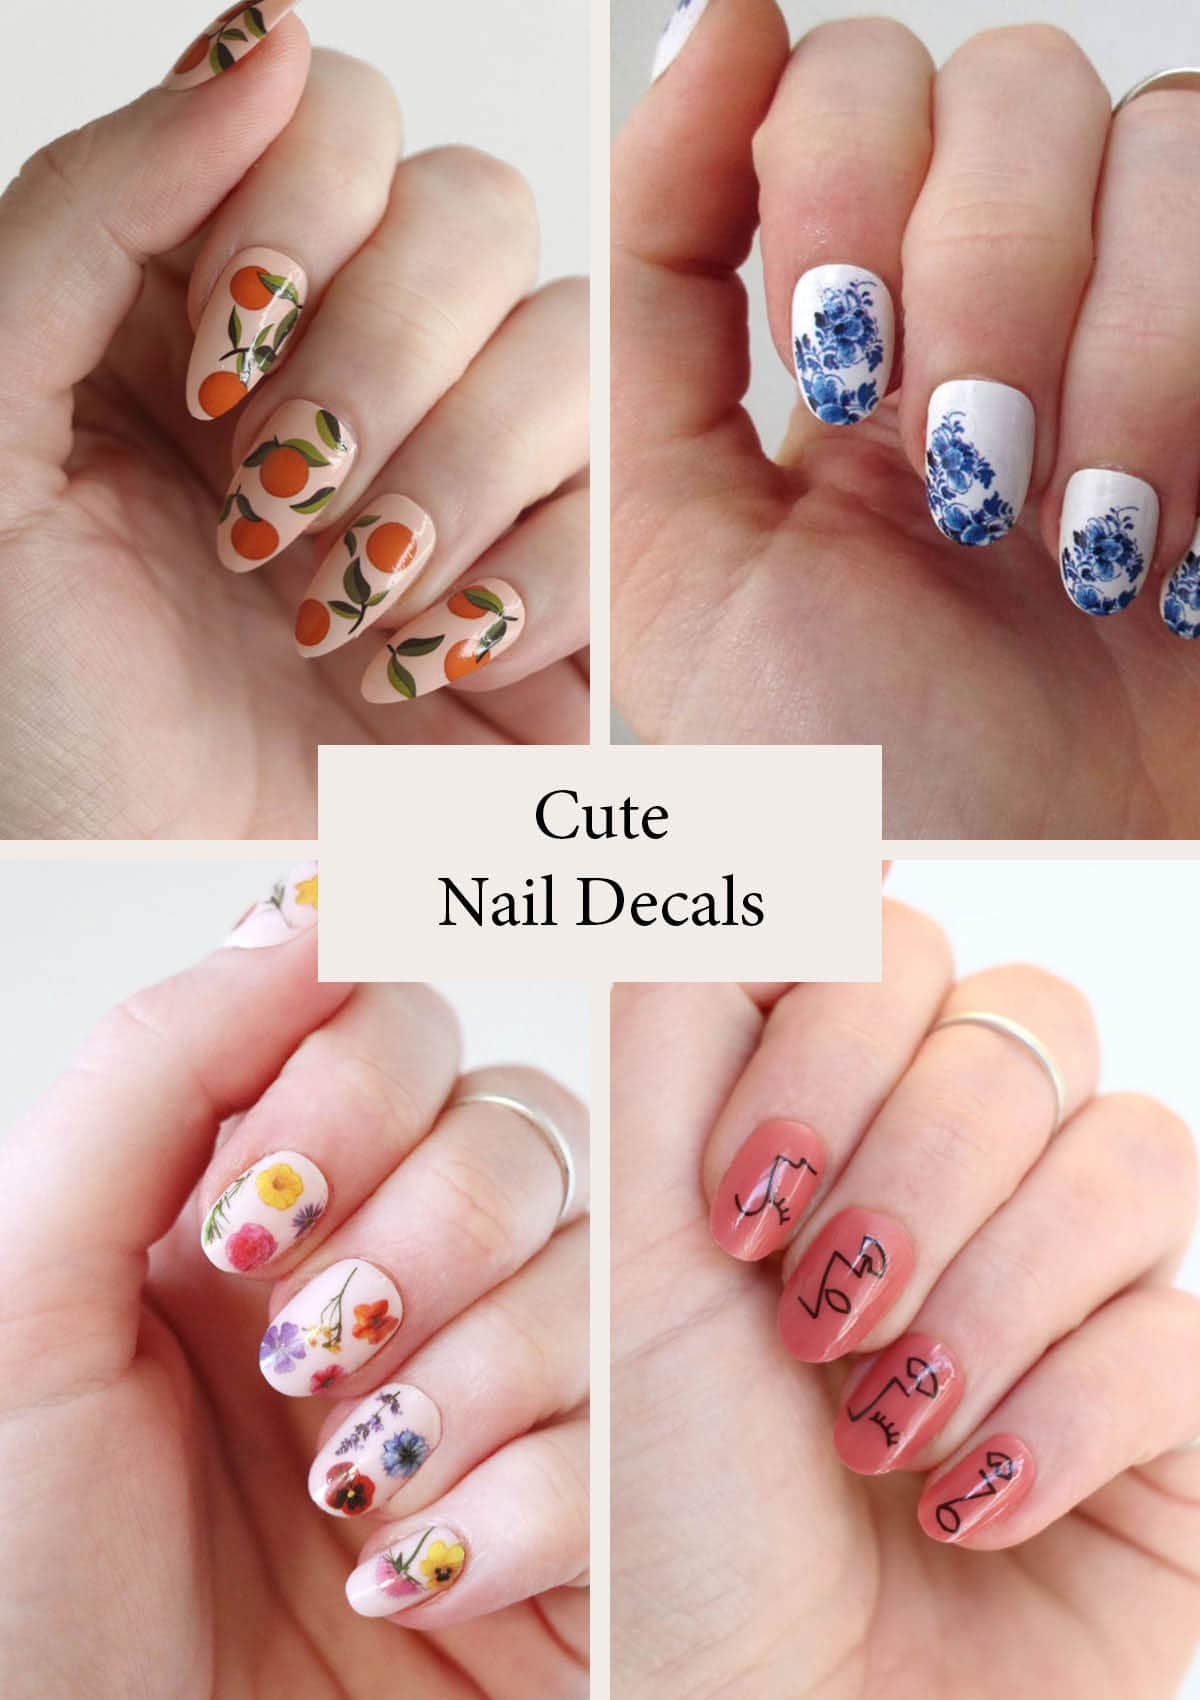 Graphic nail decals